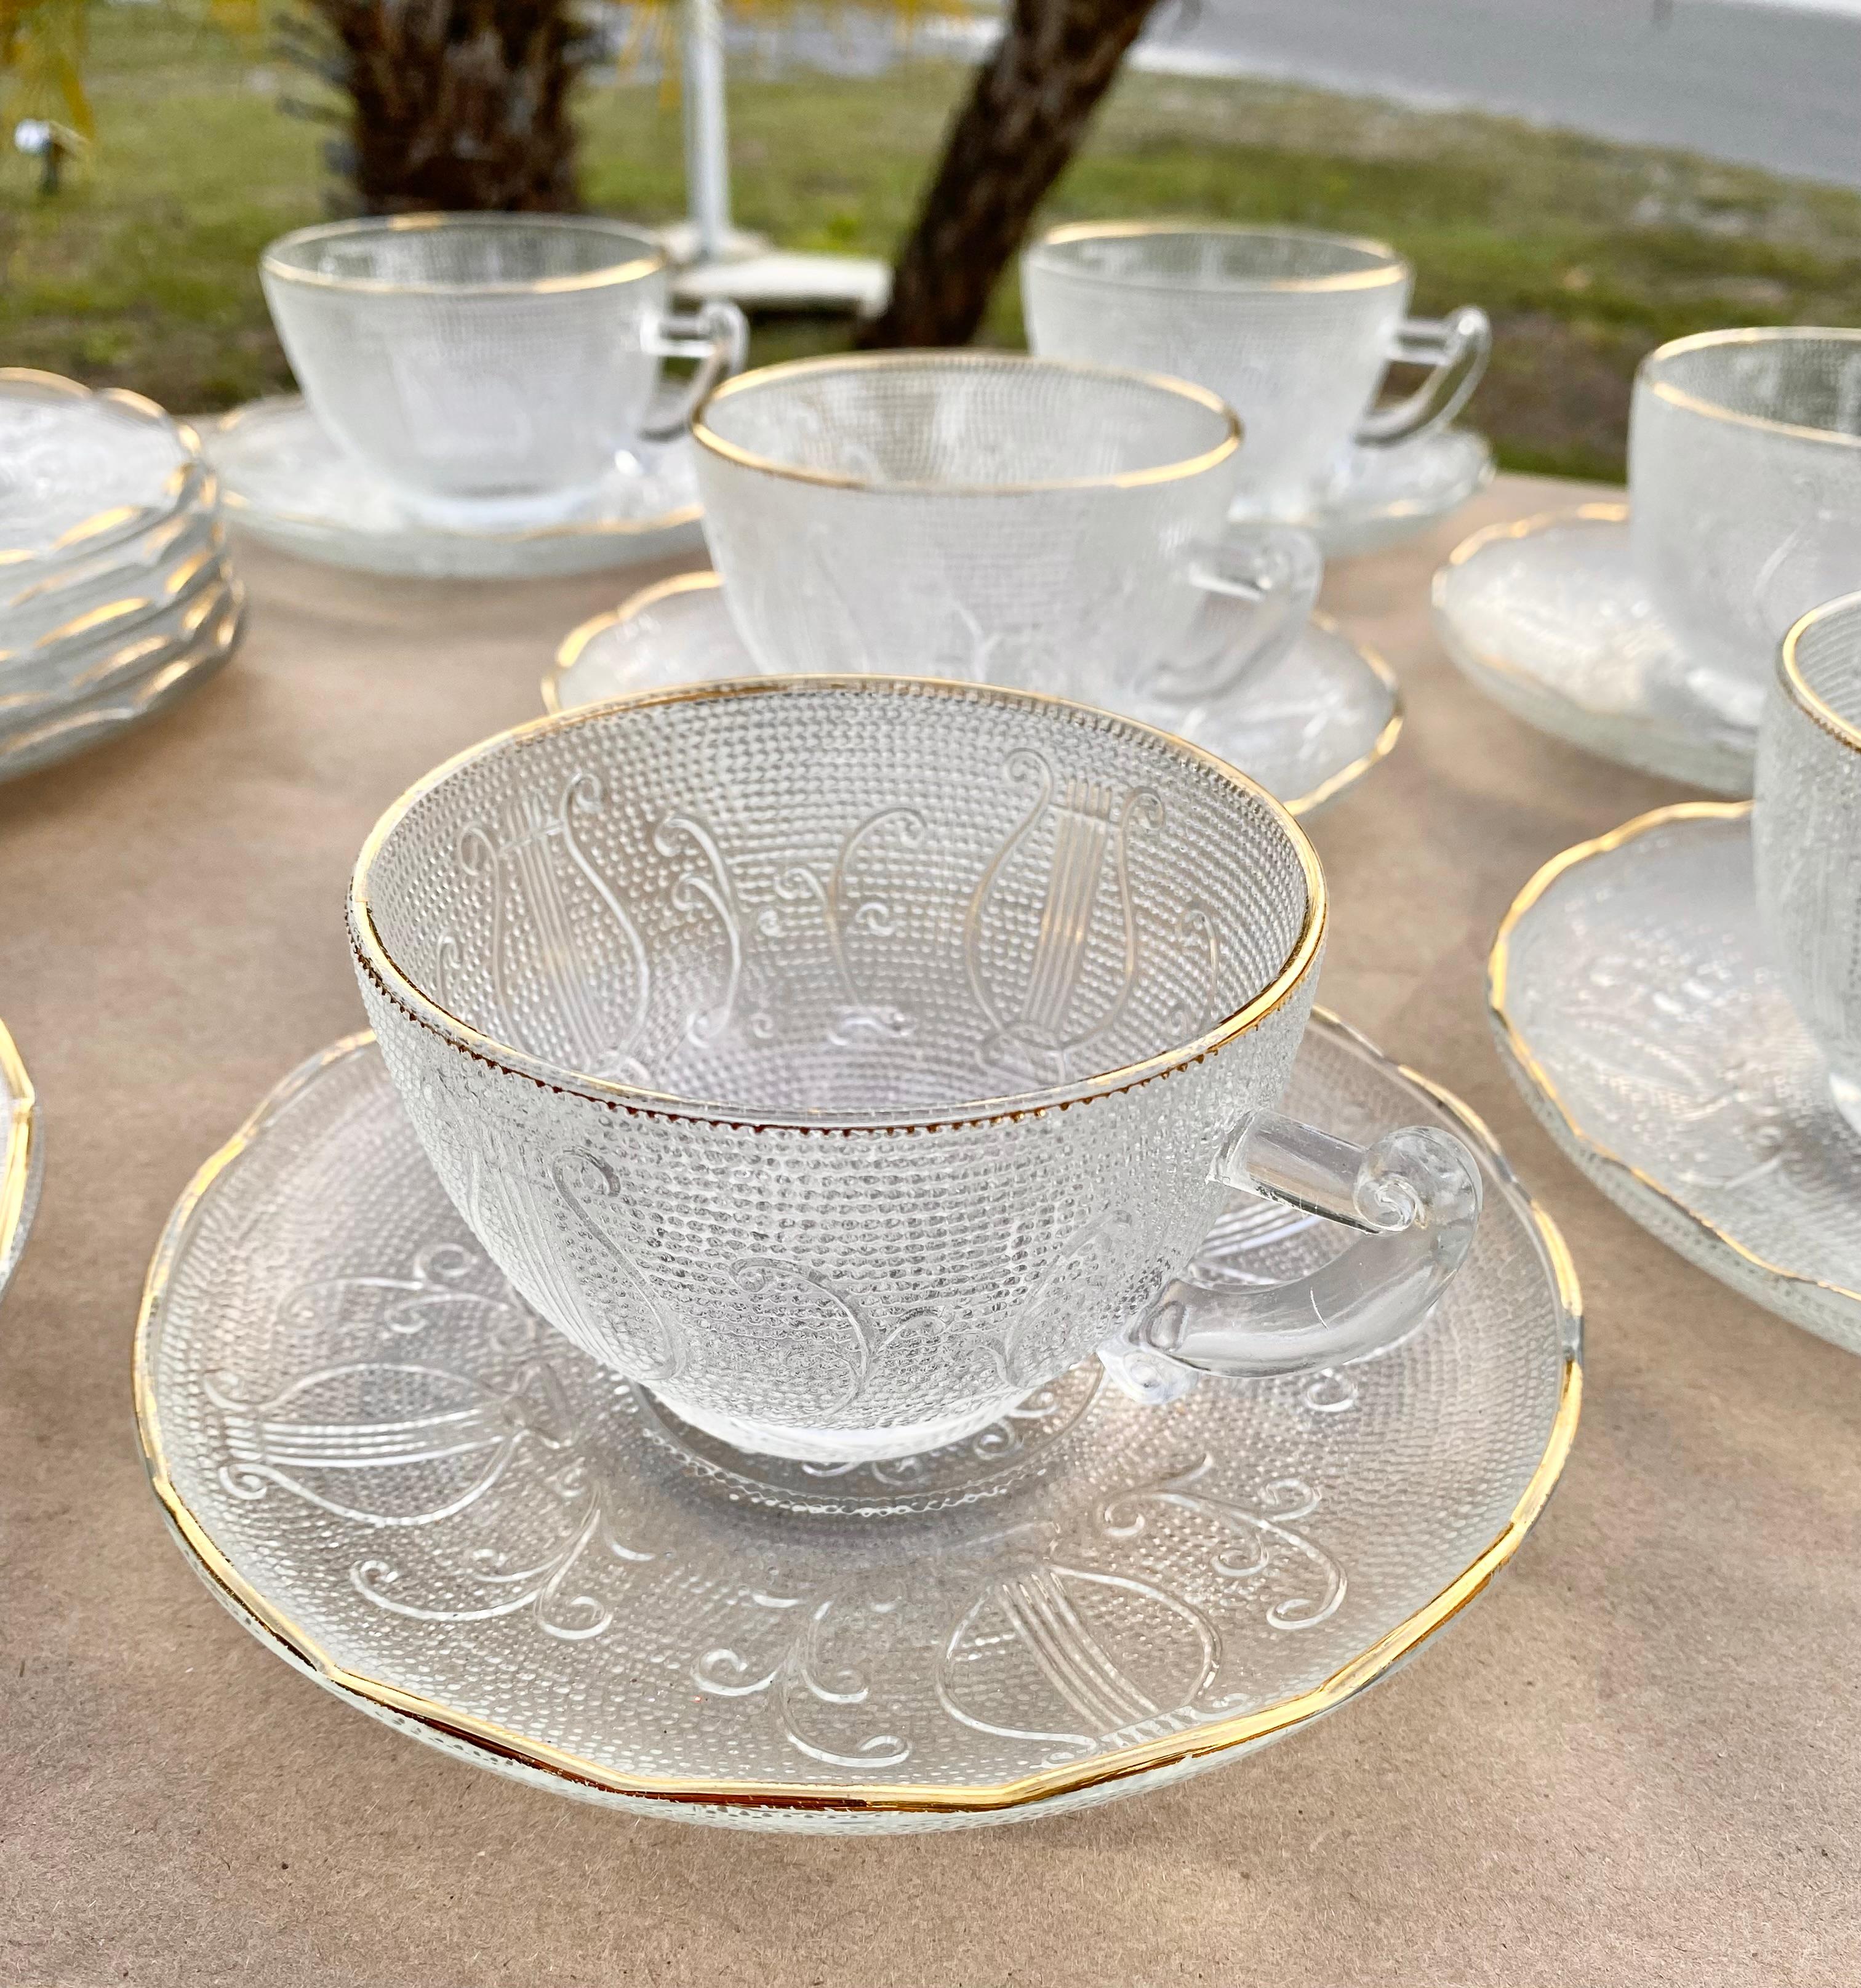 A beautiful collection of six Jeannette Glass cups, saucers and six dessert plates in the Harp pattern. Harp looks like older glass but was made for only a few years in the mid 50's: 1954 to 1957. It fits its name, with a harp design pressed on a